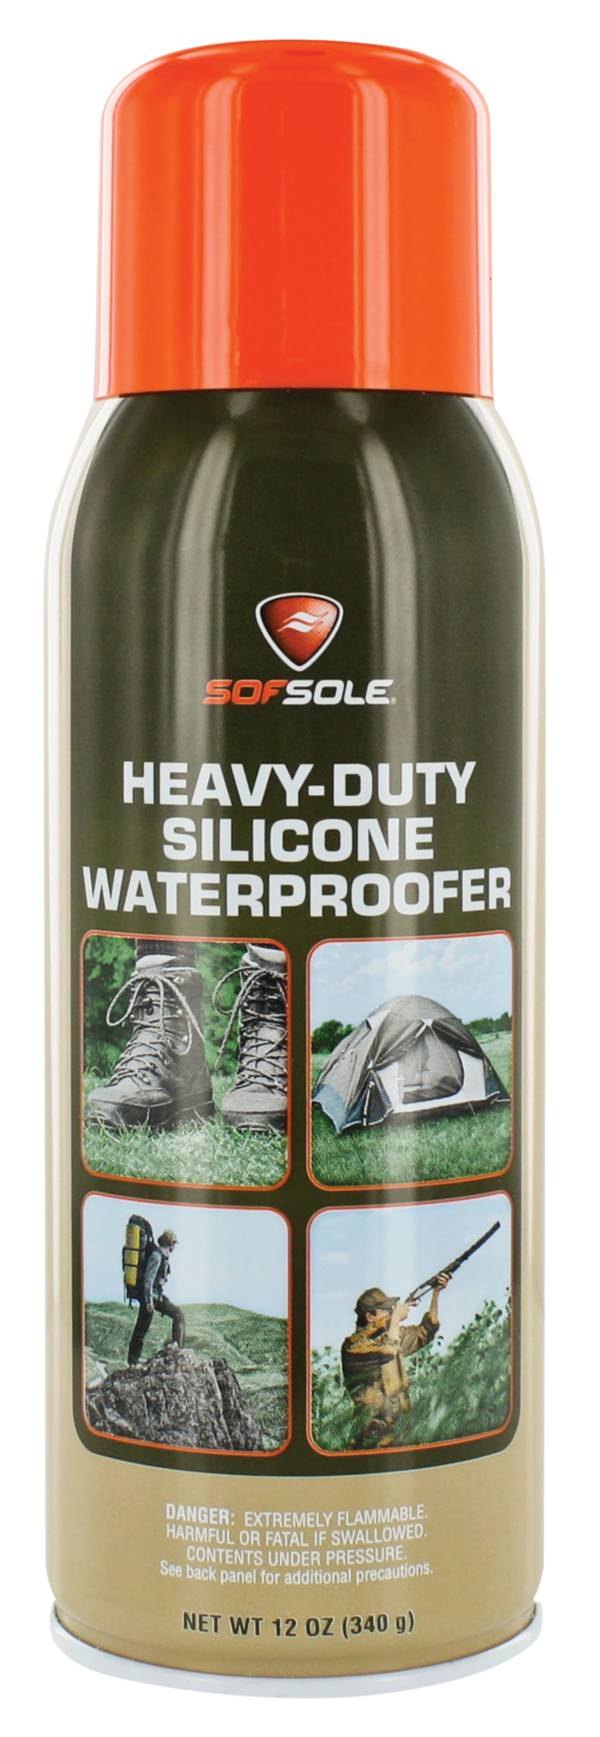 SofSole Heavy Duty Silicone Waterproofer product image